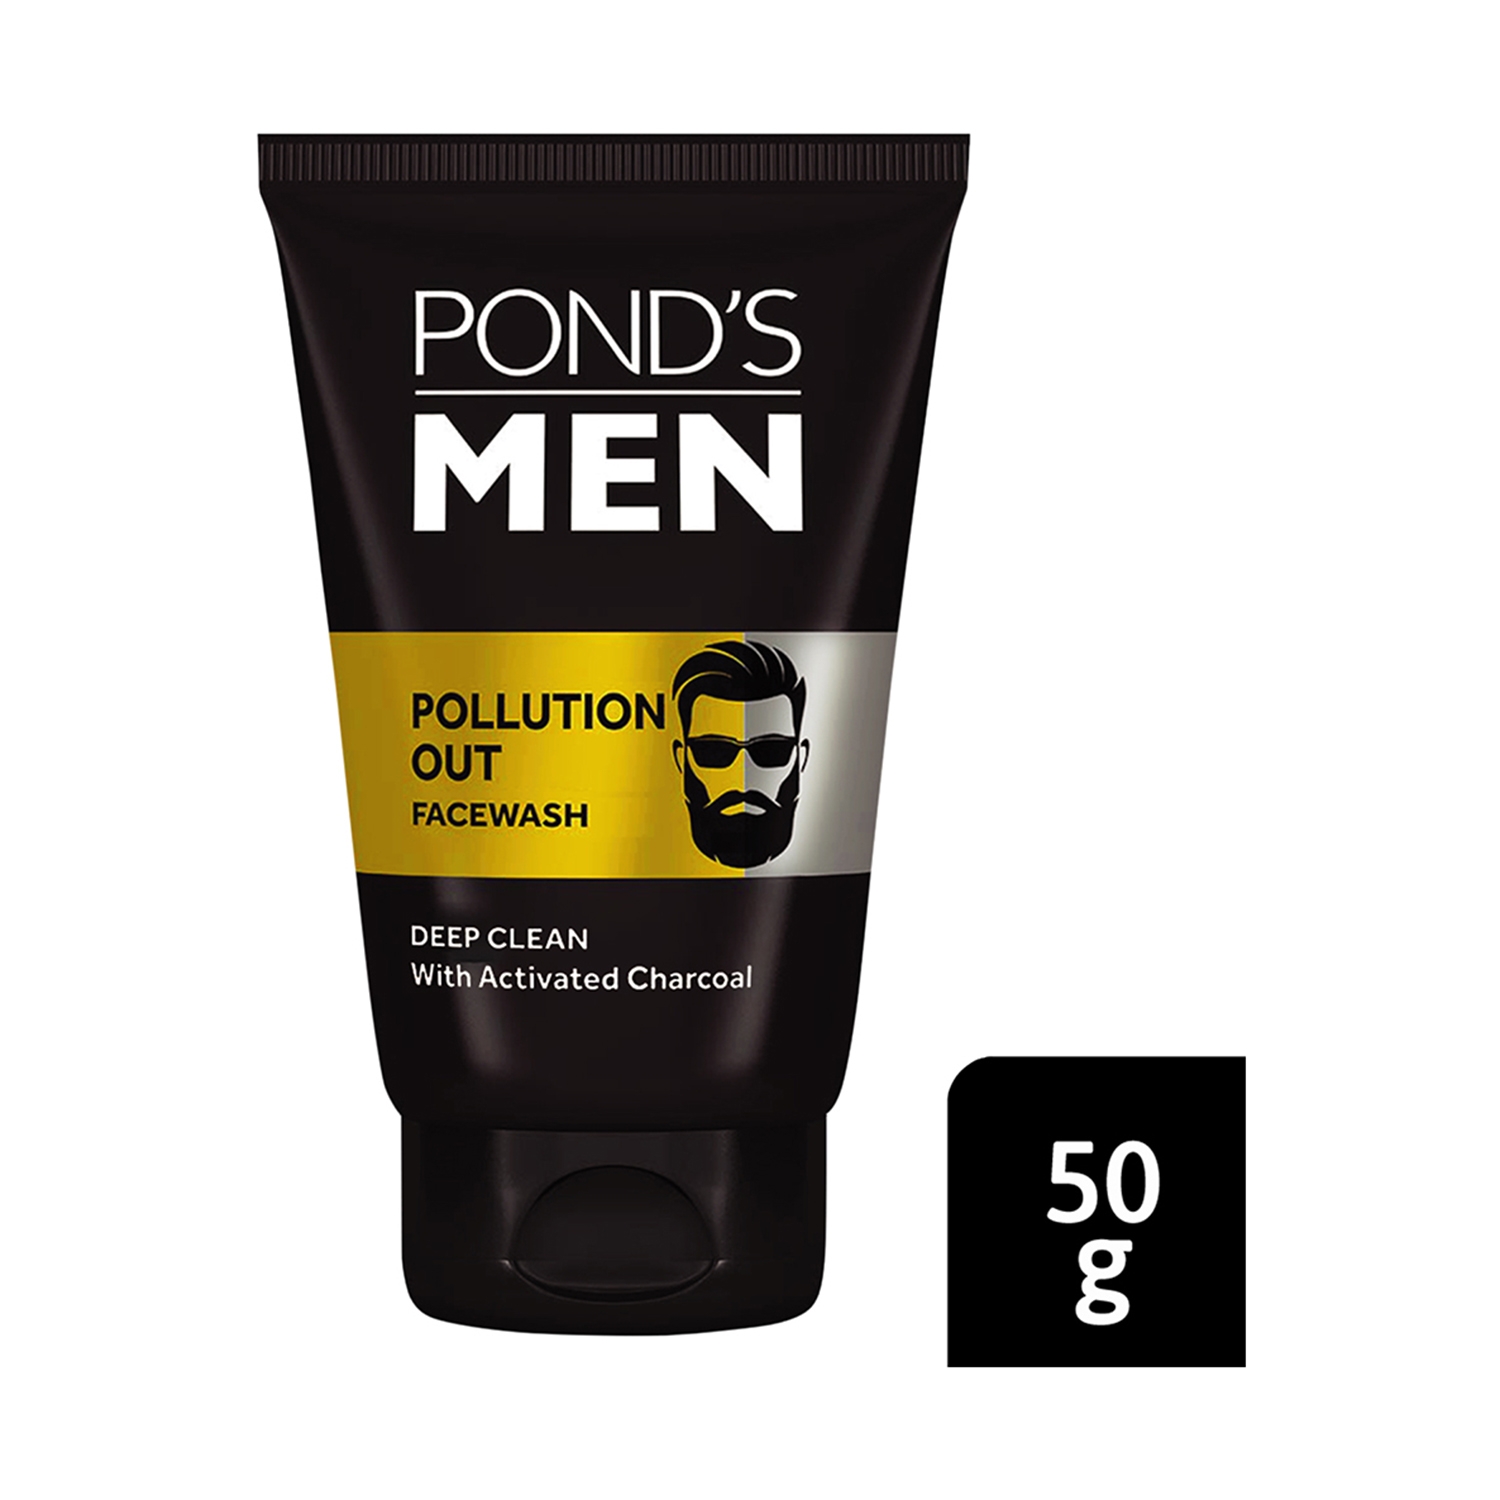 Pond's | Pond's Men Pollution Out Activated Charcoal Deep Clean Facewash - (50g)